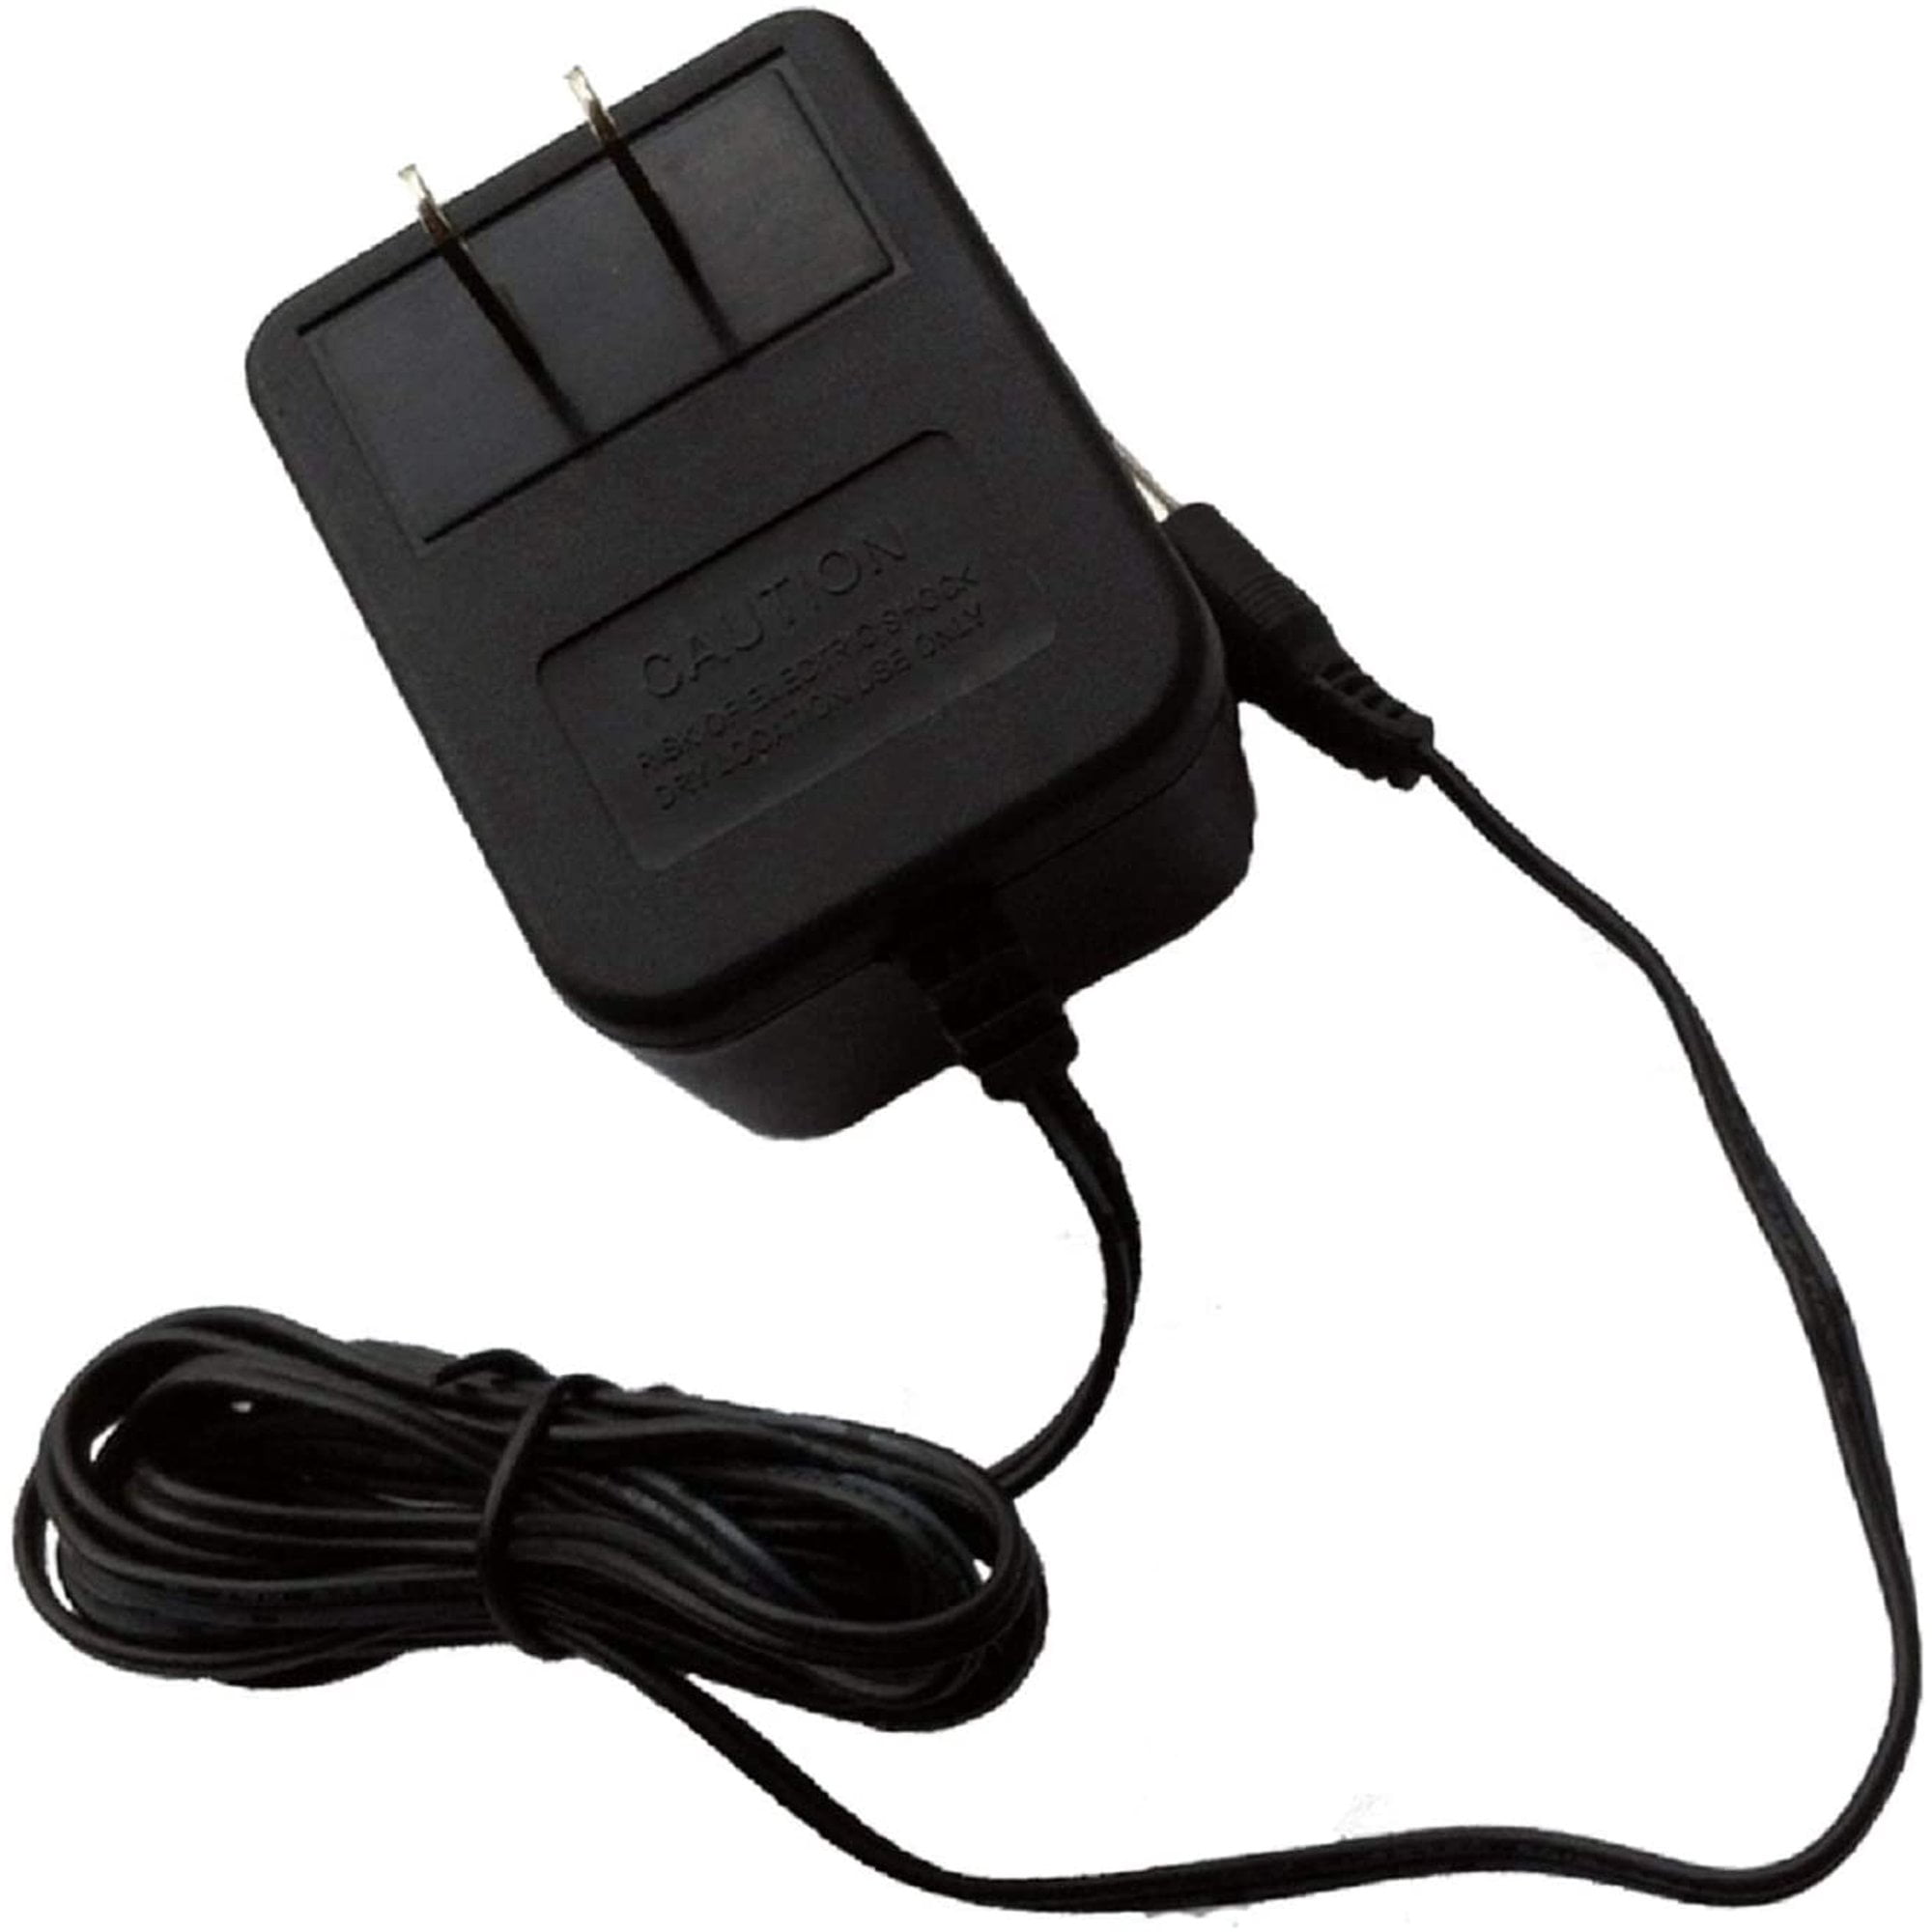 AC-AC Adapter For Coleman 5348-700 5348700 6" lantern Charger Power Supply Cord 